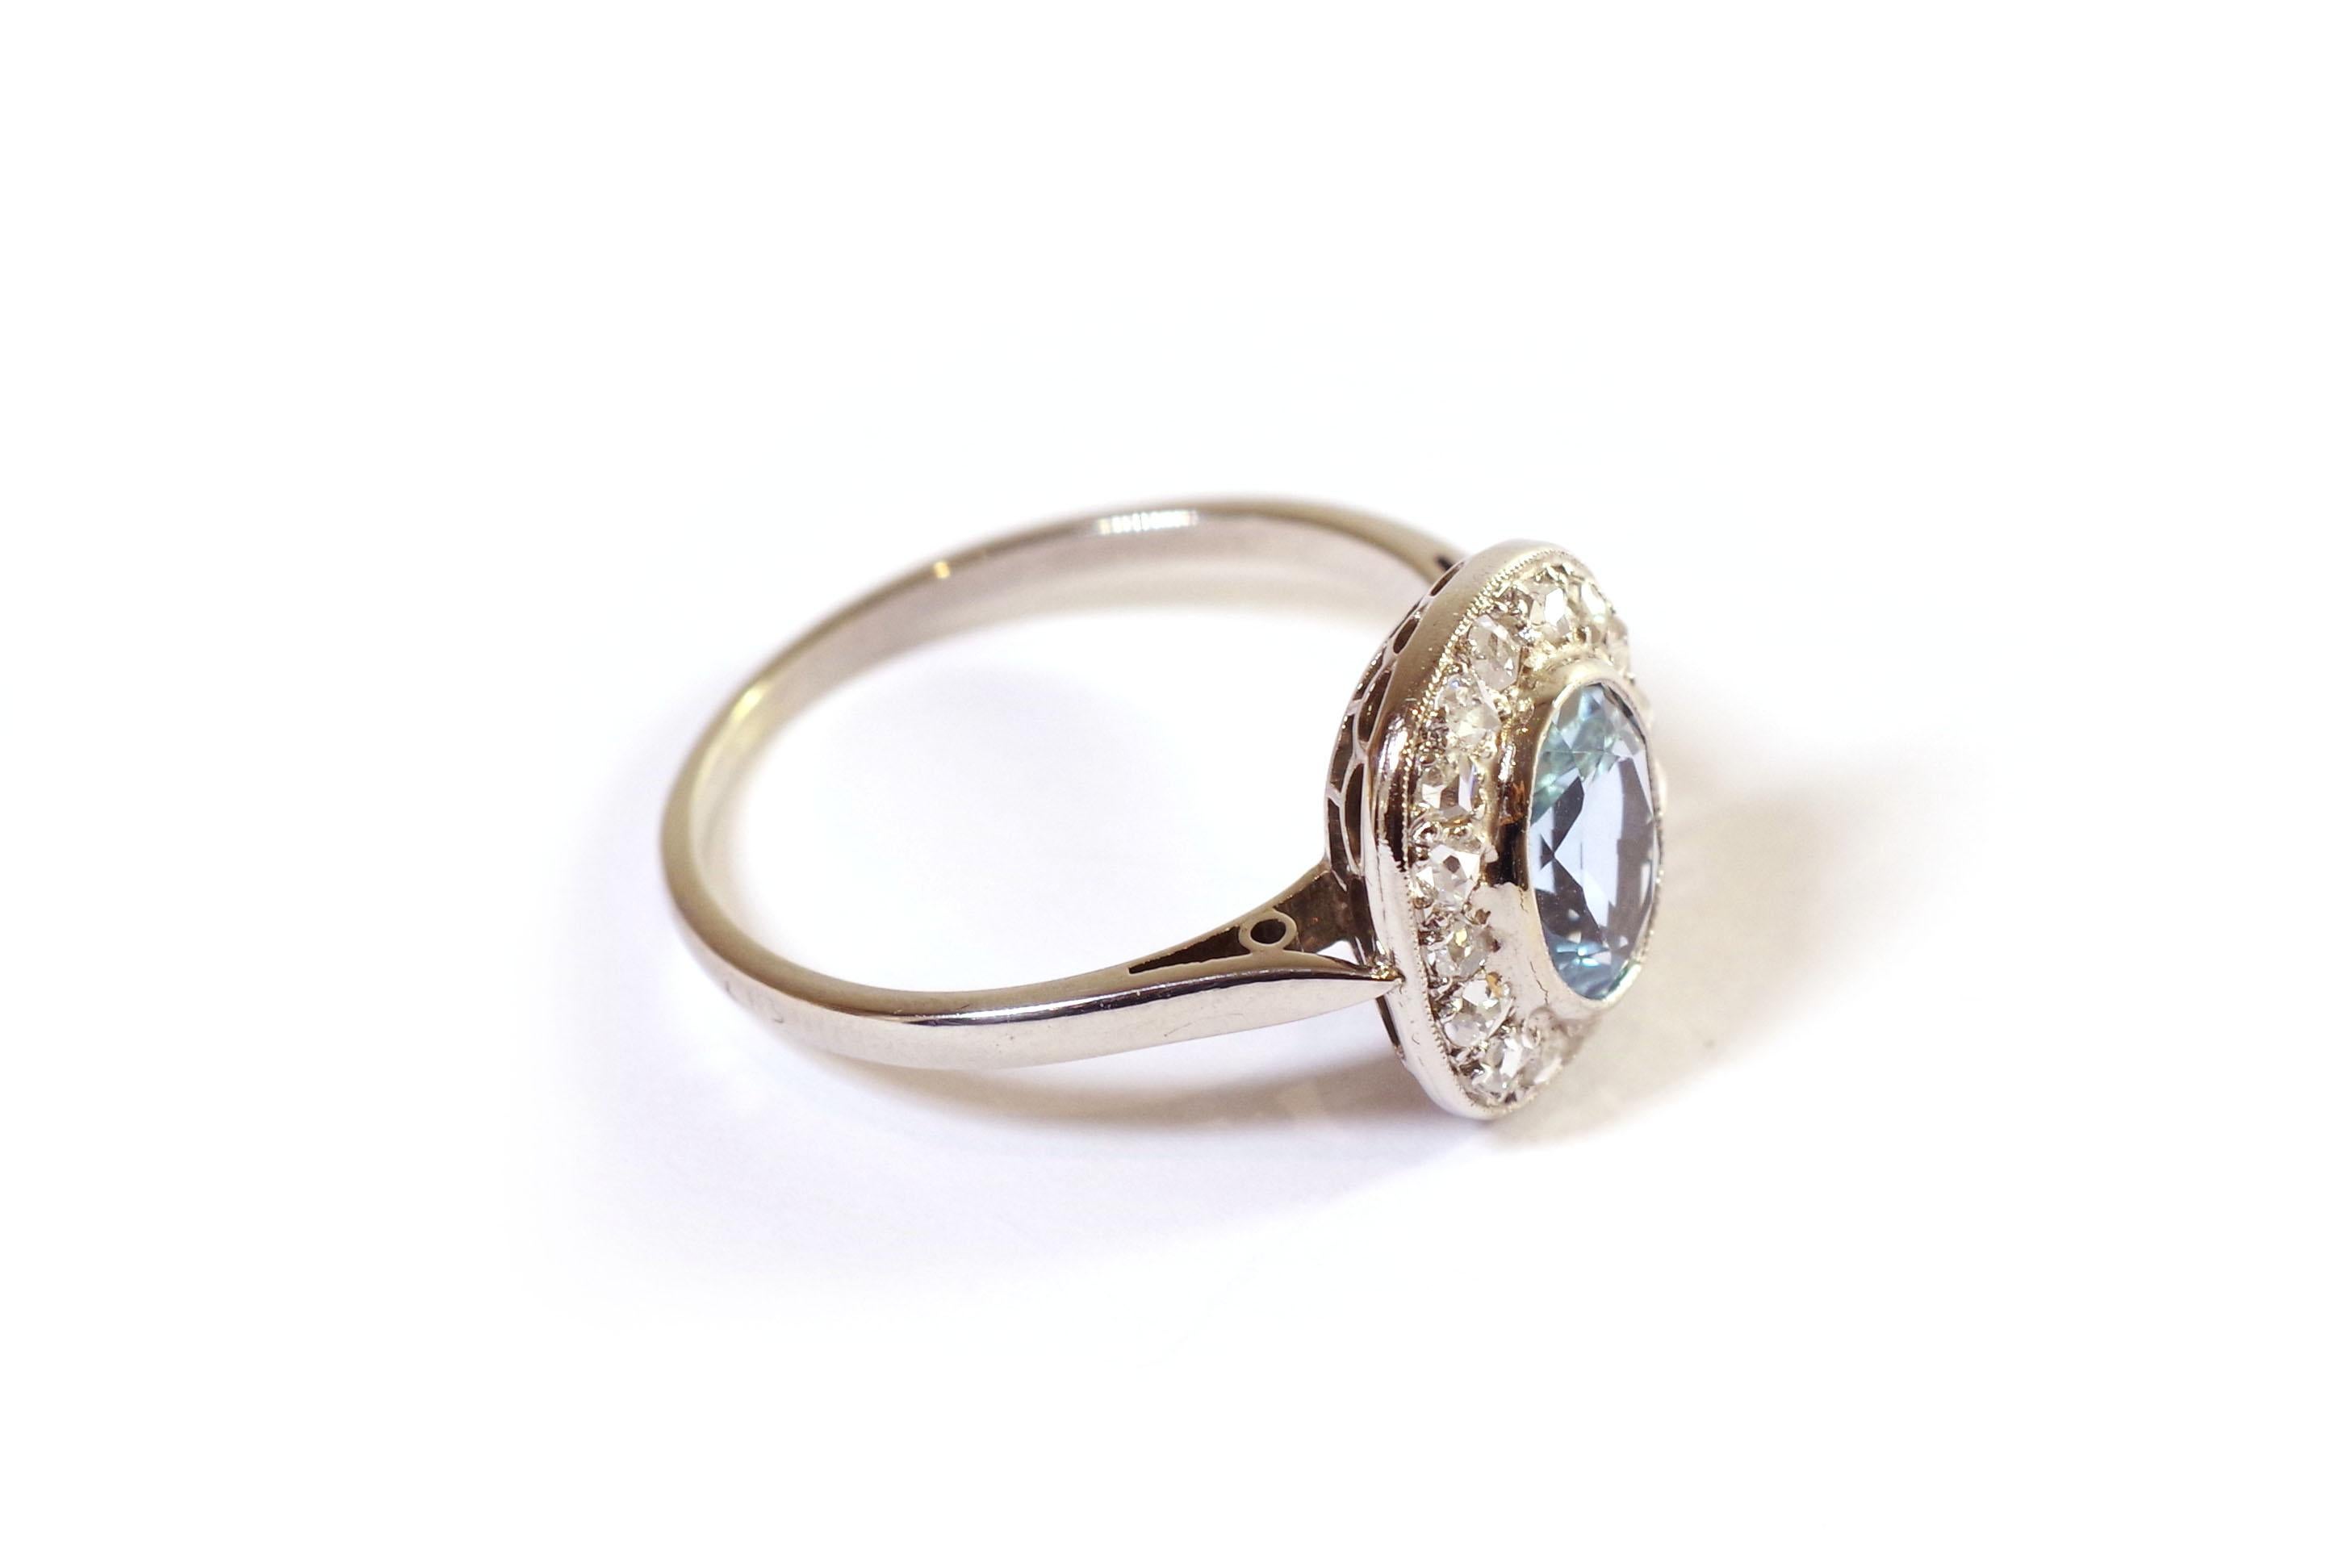 Oval Cut Belle Epoque Aquamarine Diamonds Ring in Gold and Platinum, Cluster Wedding Ring For Sale